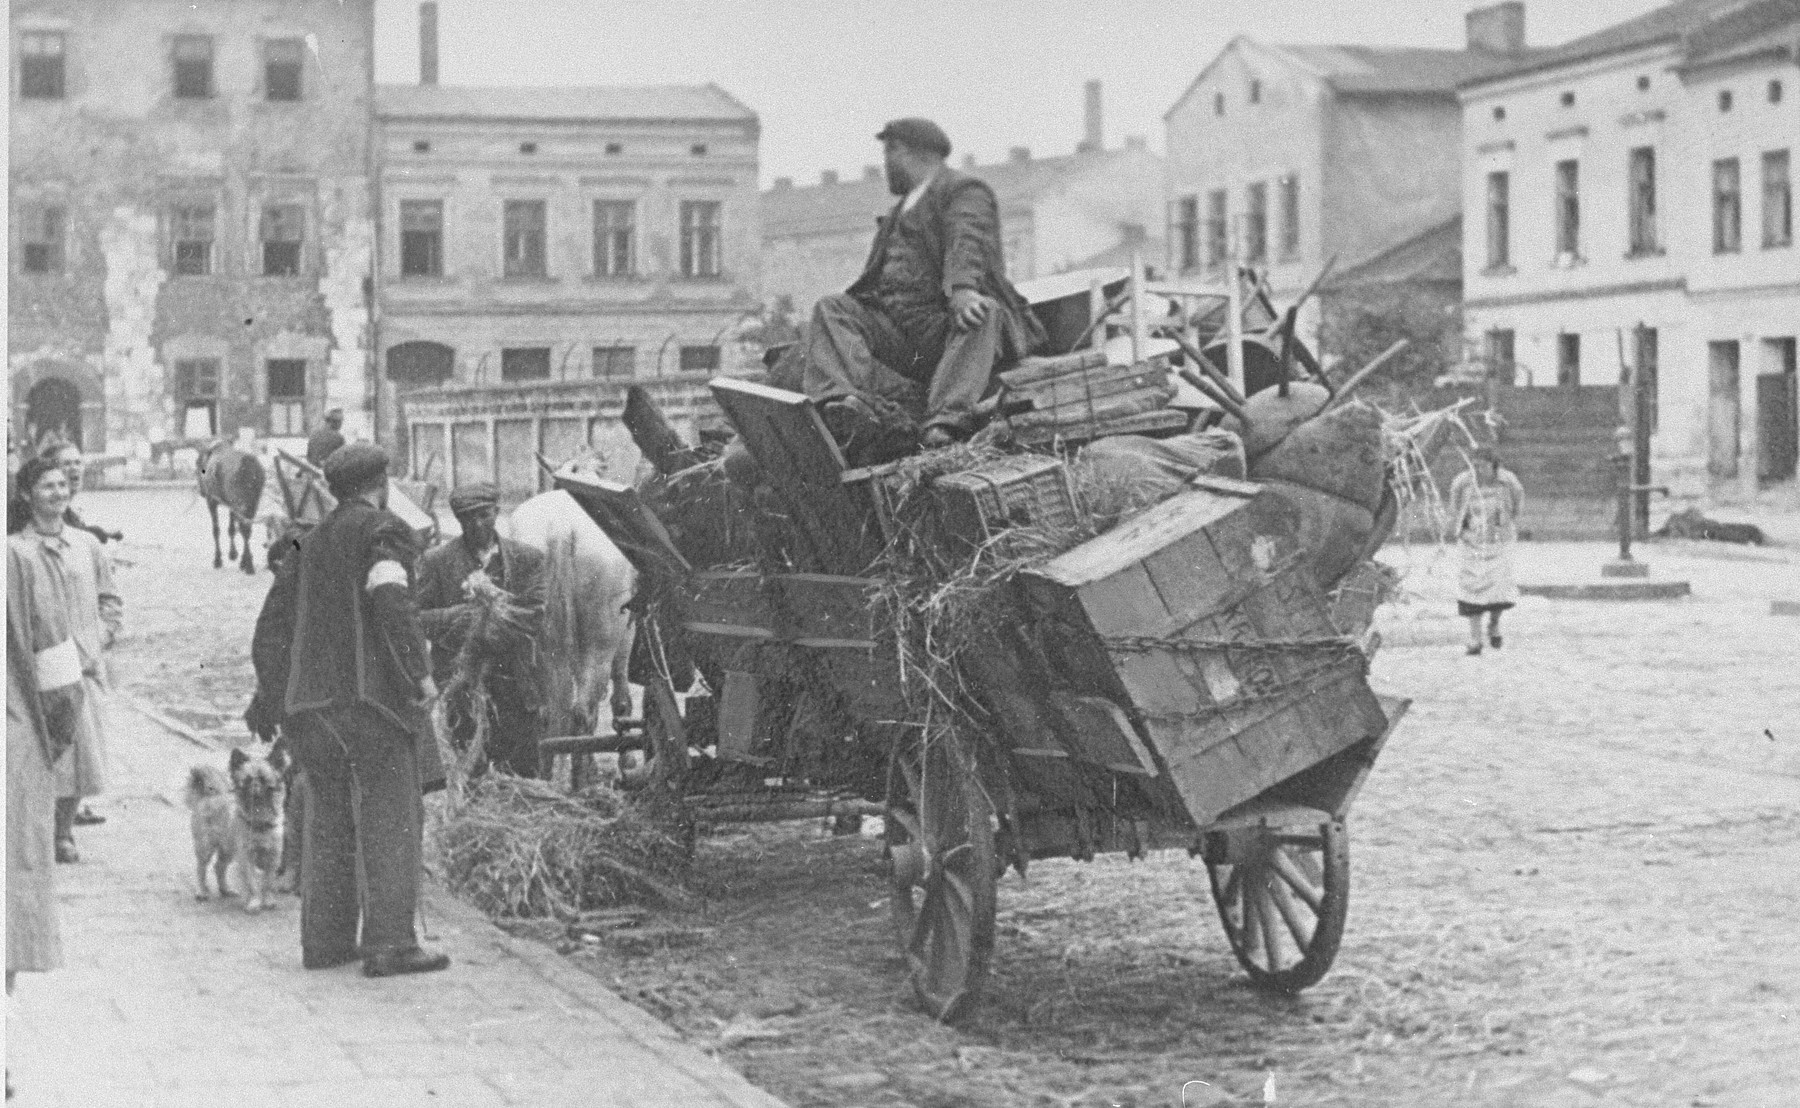 Forced to relocate to the Krakow ghetto, Jews move their belongings in horse-drawn wagons.